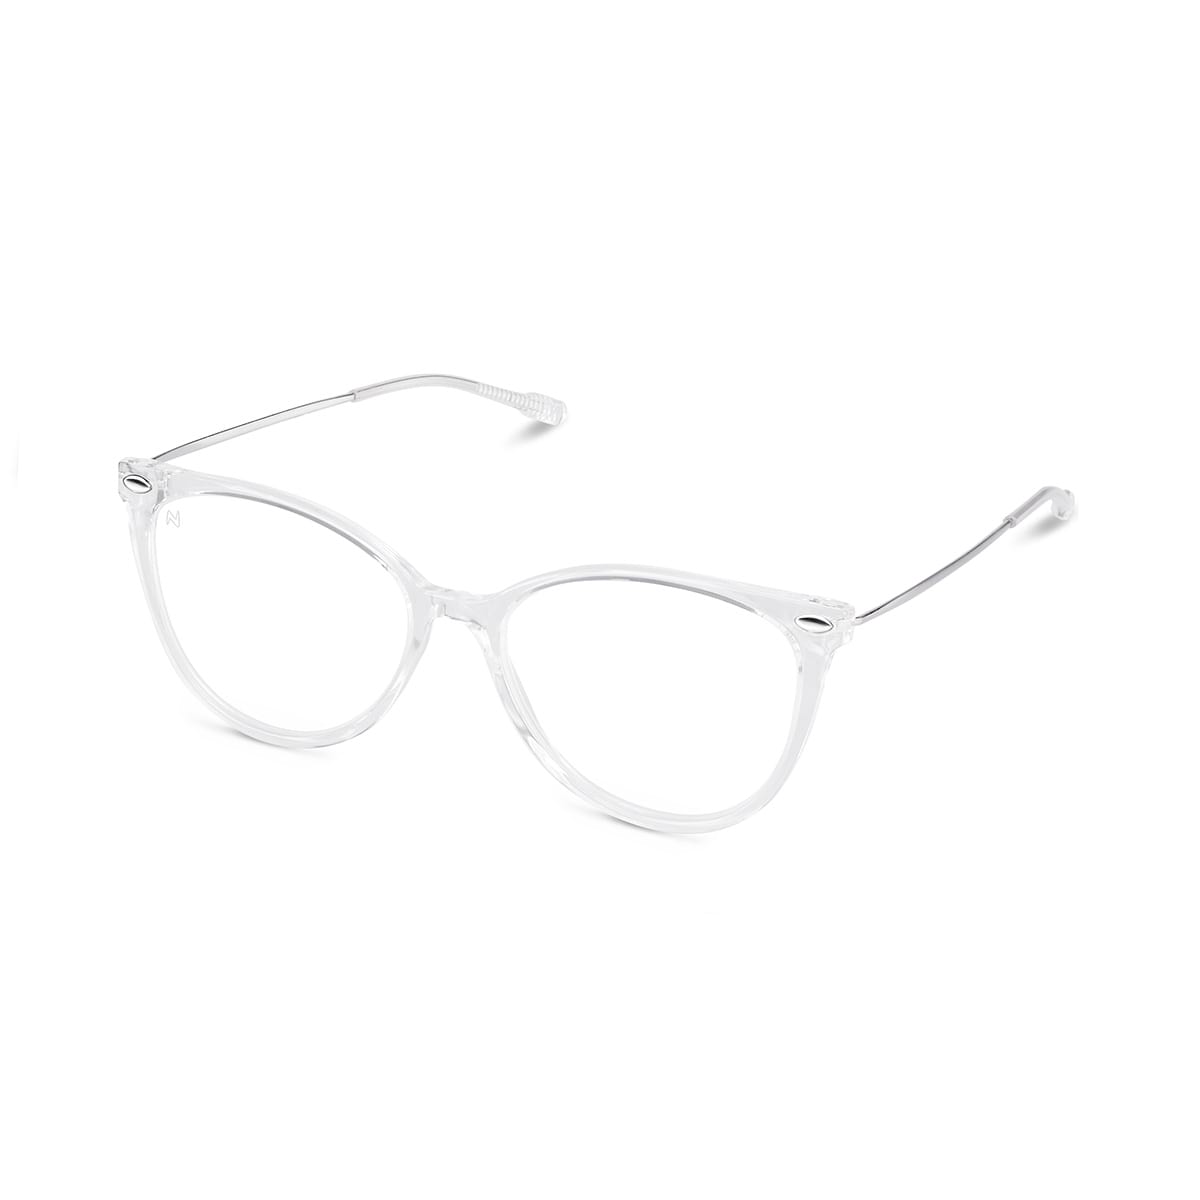 Reading glasses without branches Essential Alba Black from side